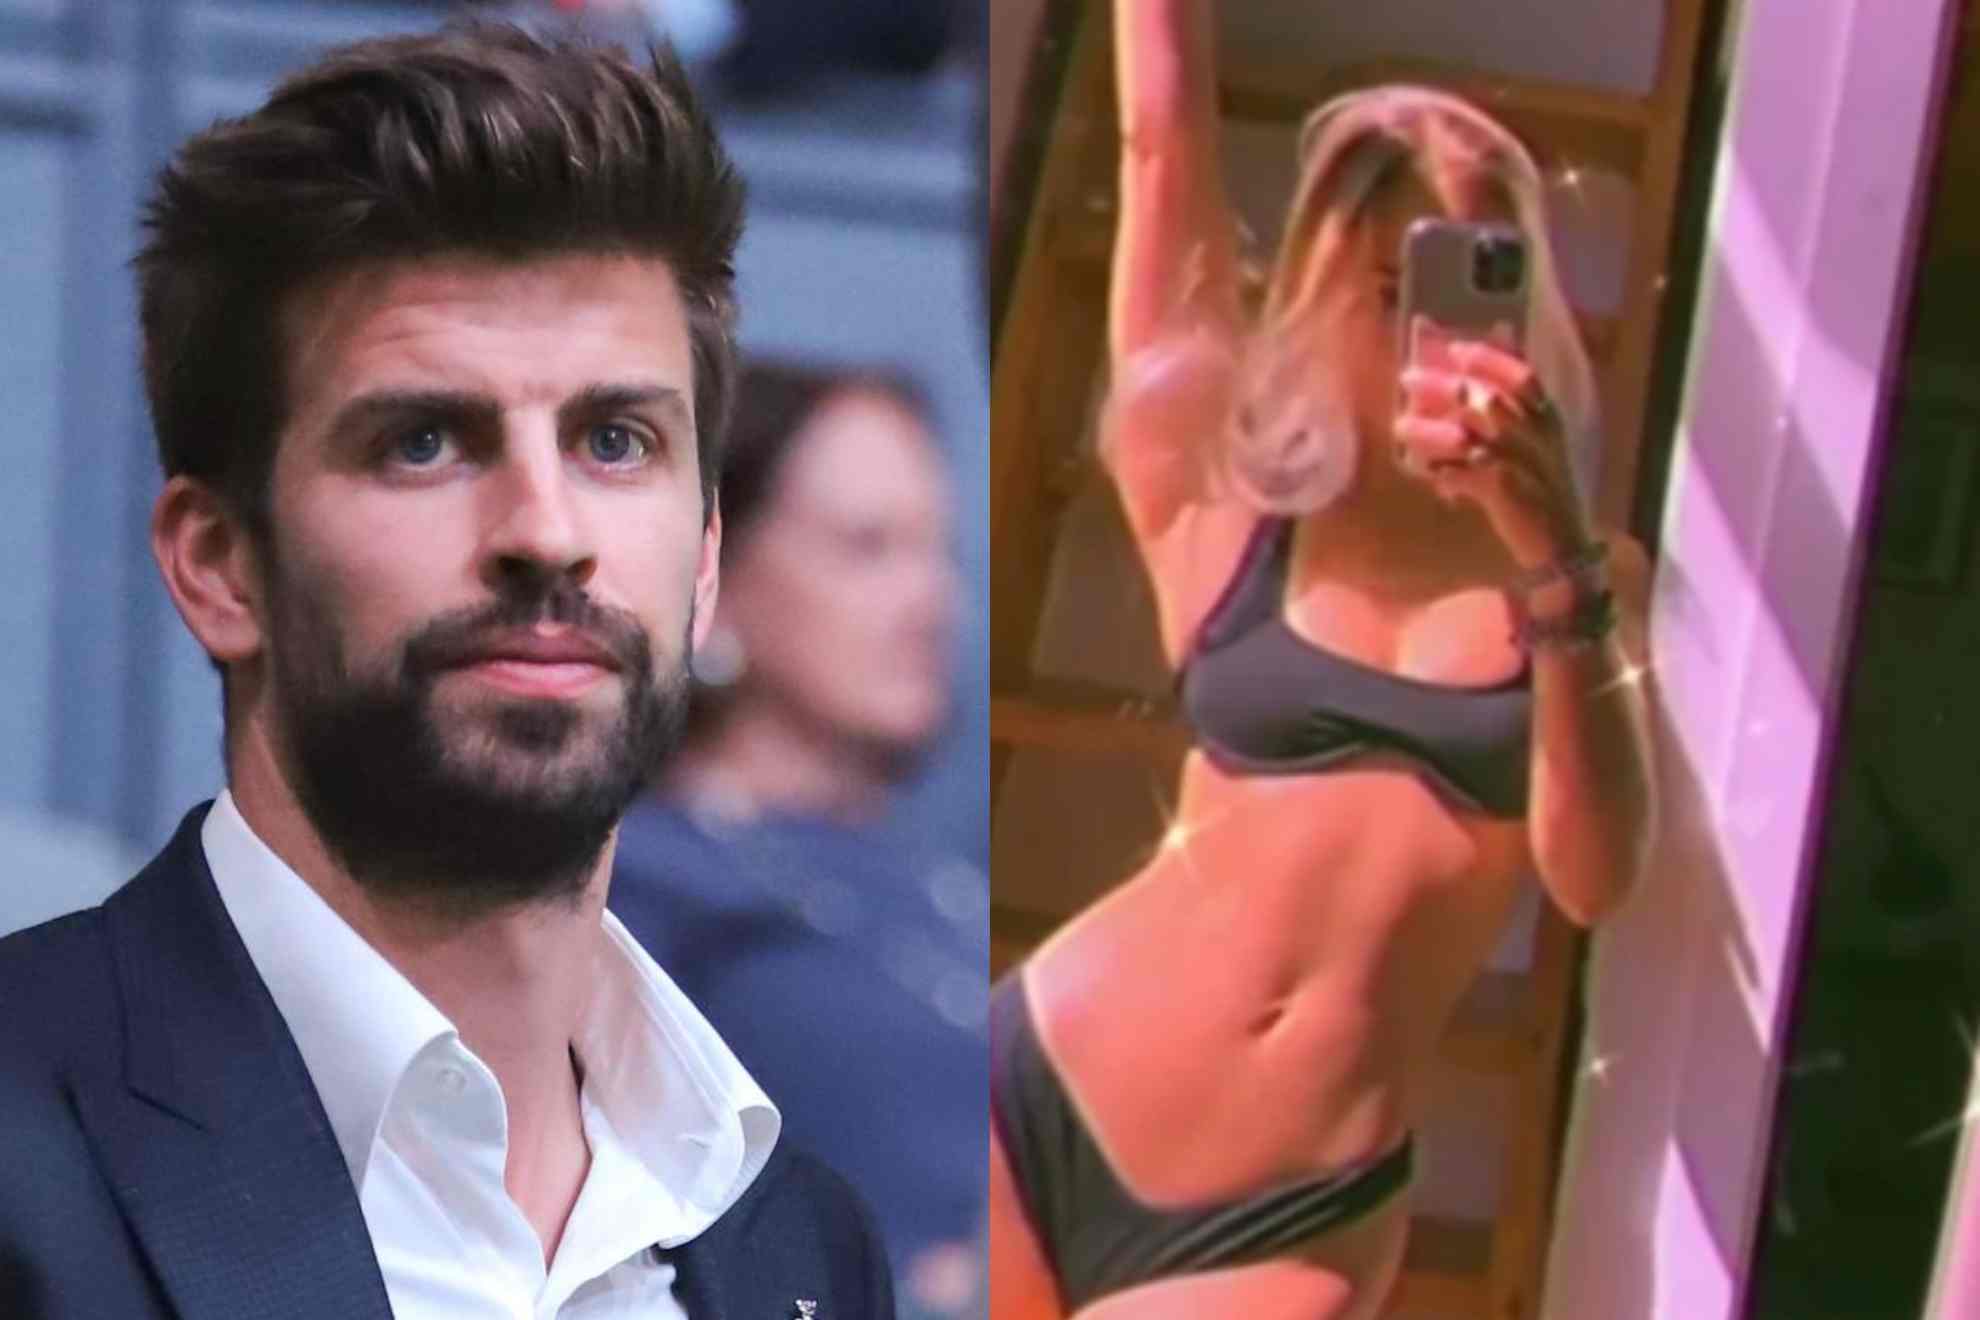 Fake Clara Chia could face two charges for impersonating Pique's girlfriend